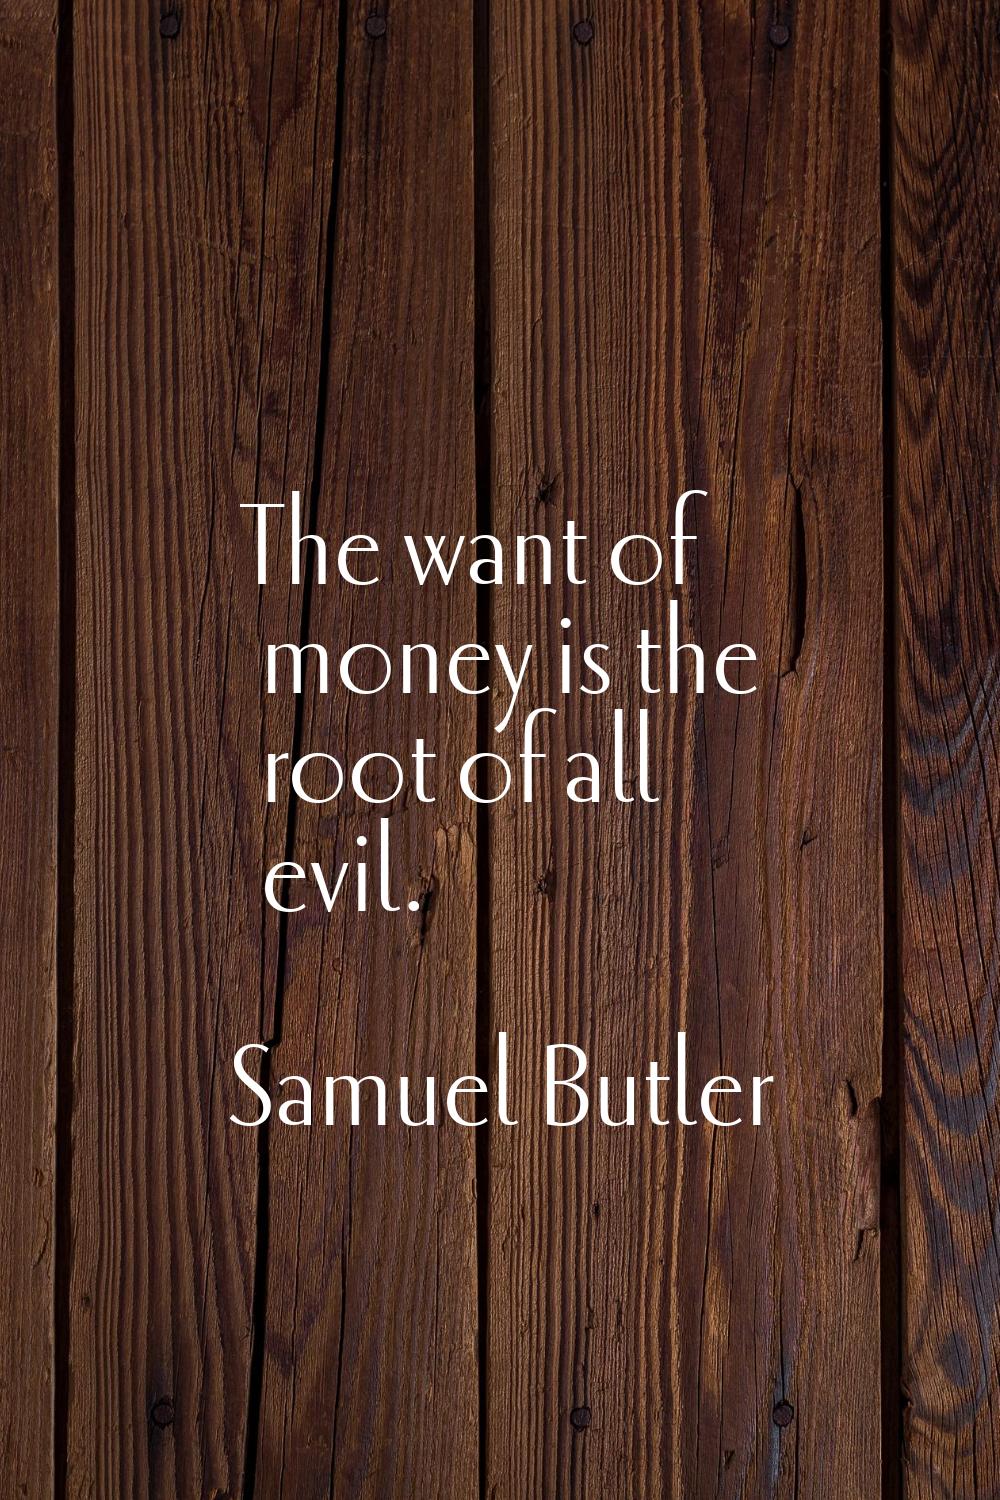 The want of money is the root of all evil.